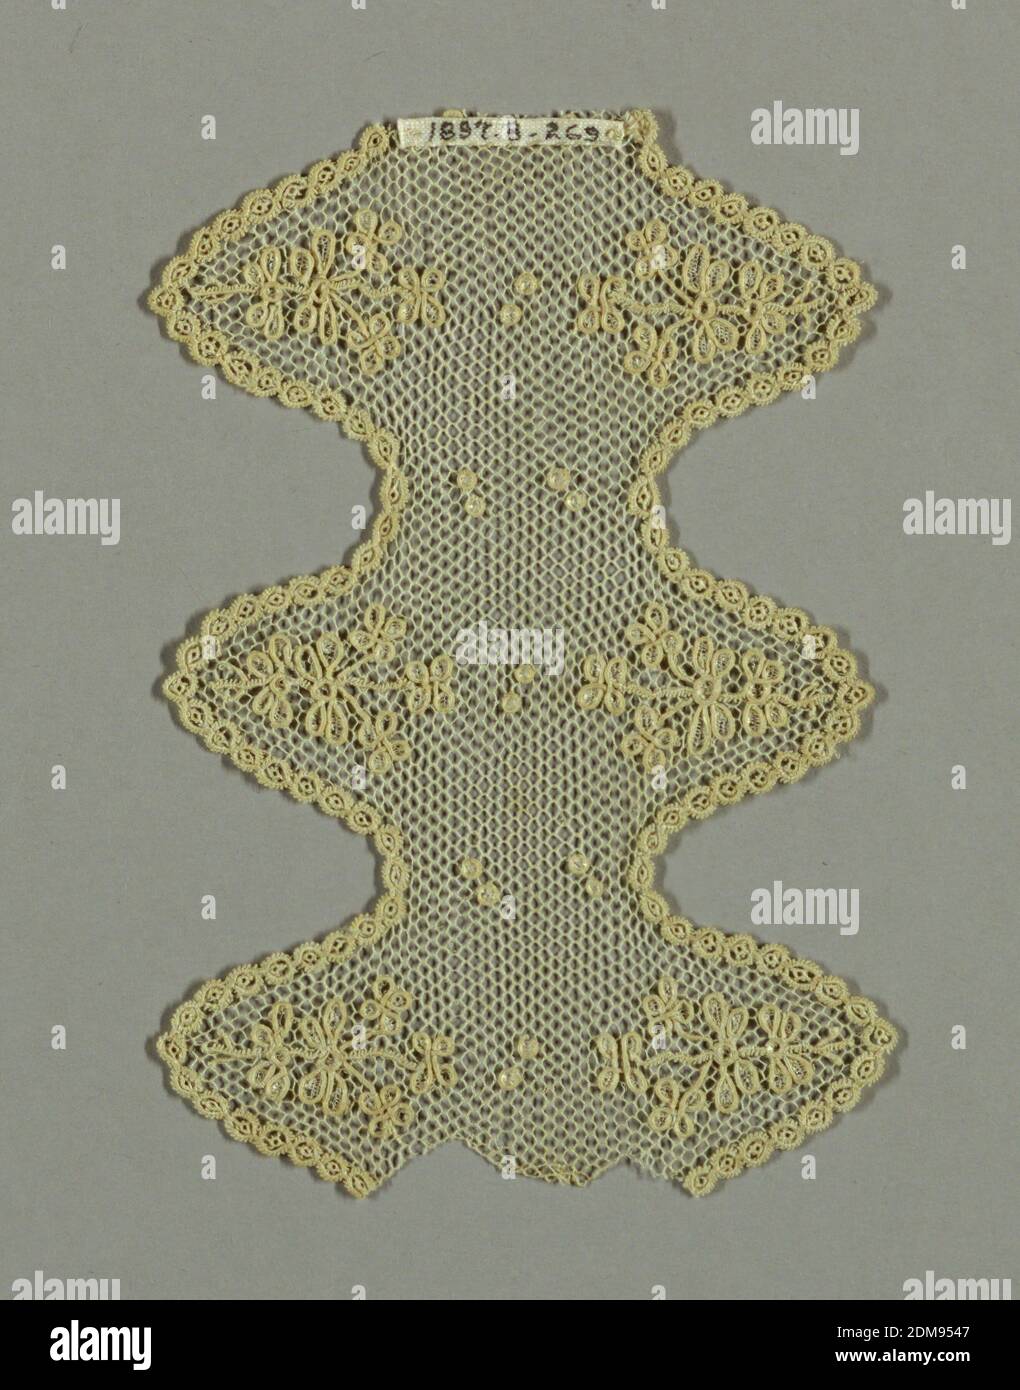 Fragment, Medium: linen Technique: needle lace, Fragment with both edges showing deep pointed scallops. Dots powdered over the ground. Floral sprays in each scallop. Edges of scallops have minute rosettes., France, late 18th century, lace, Fragment Stock Photo